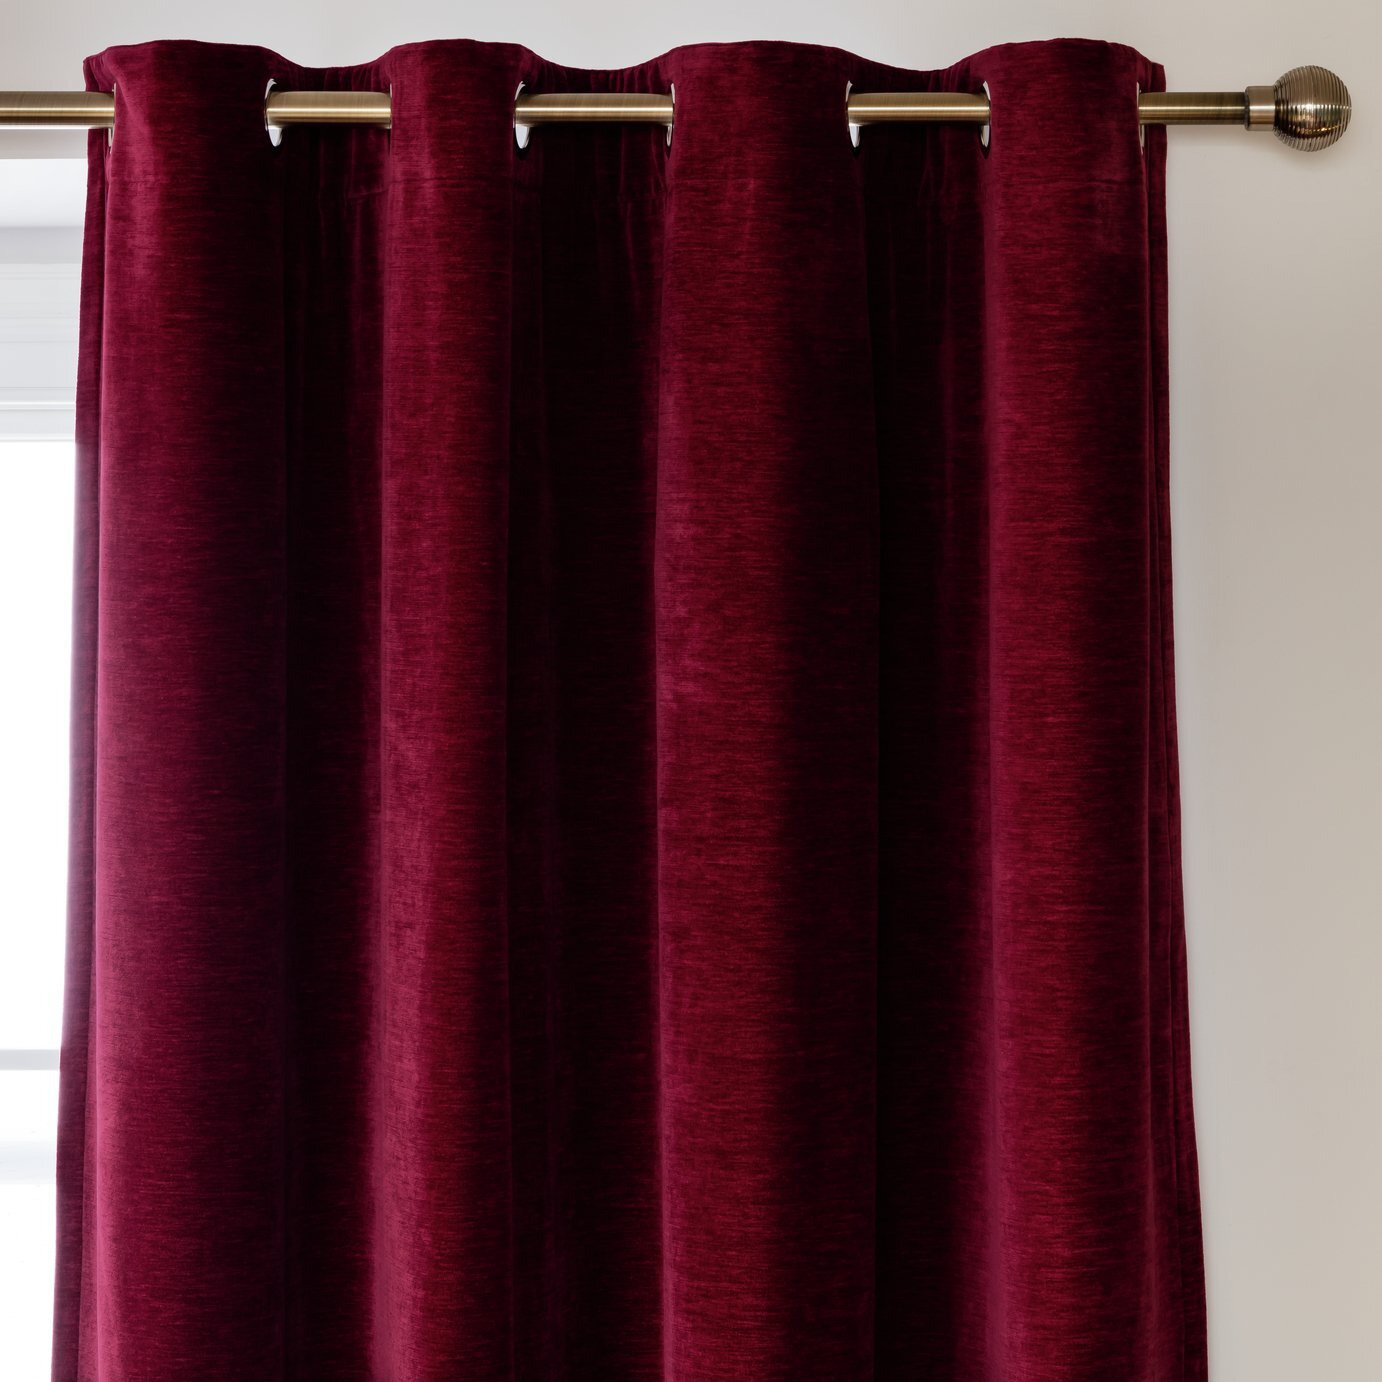 Habitat Plain Chenille Blackout Lined Thermal Curtain -Berry